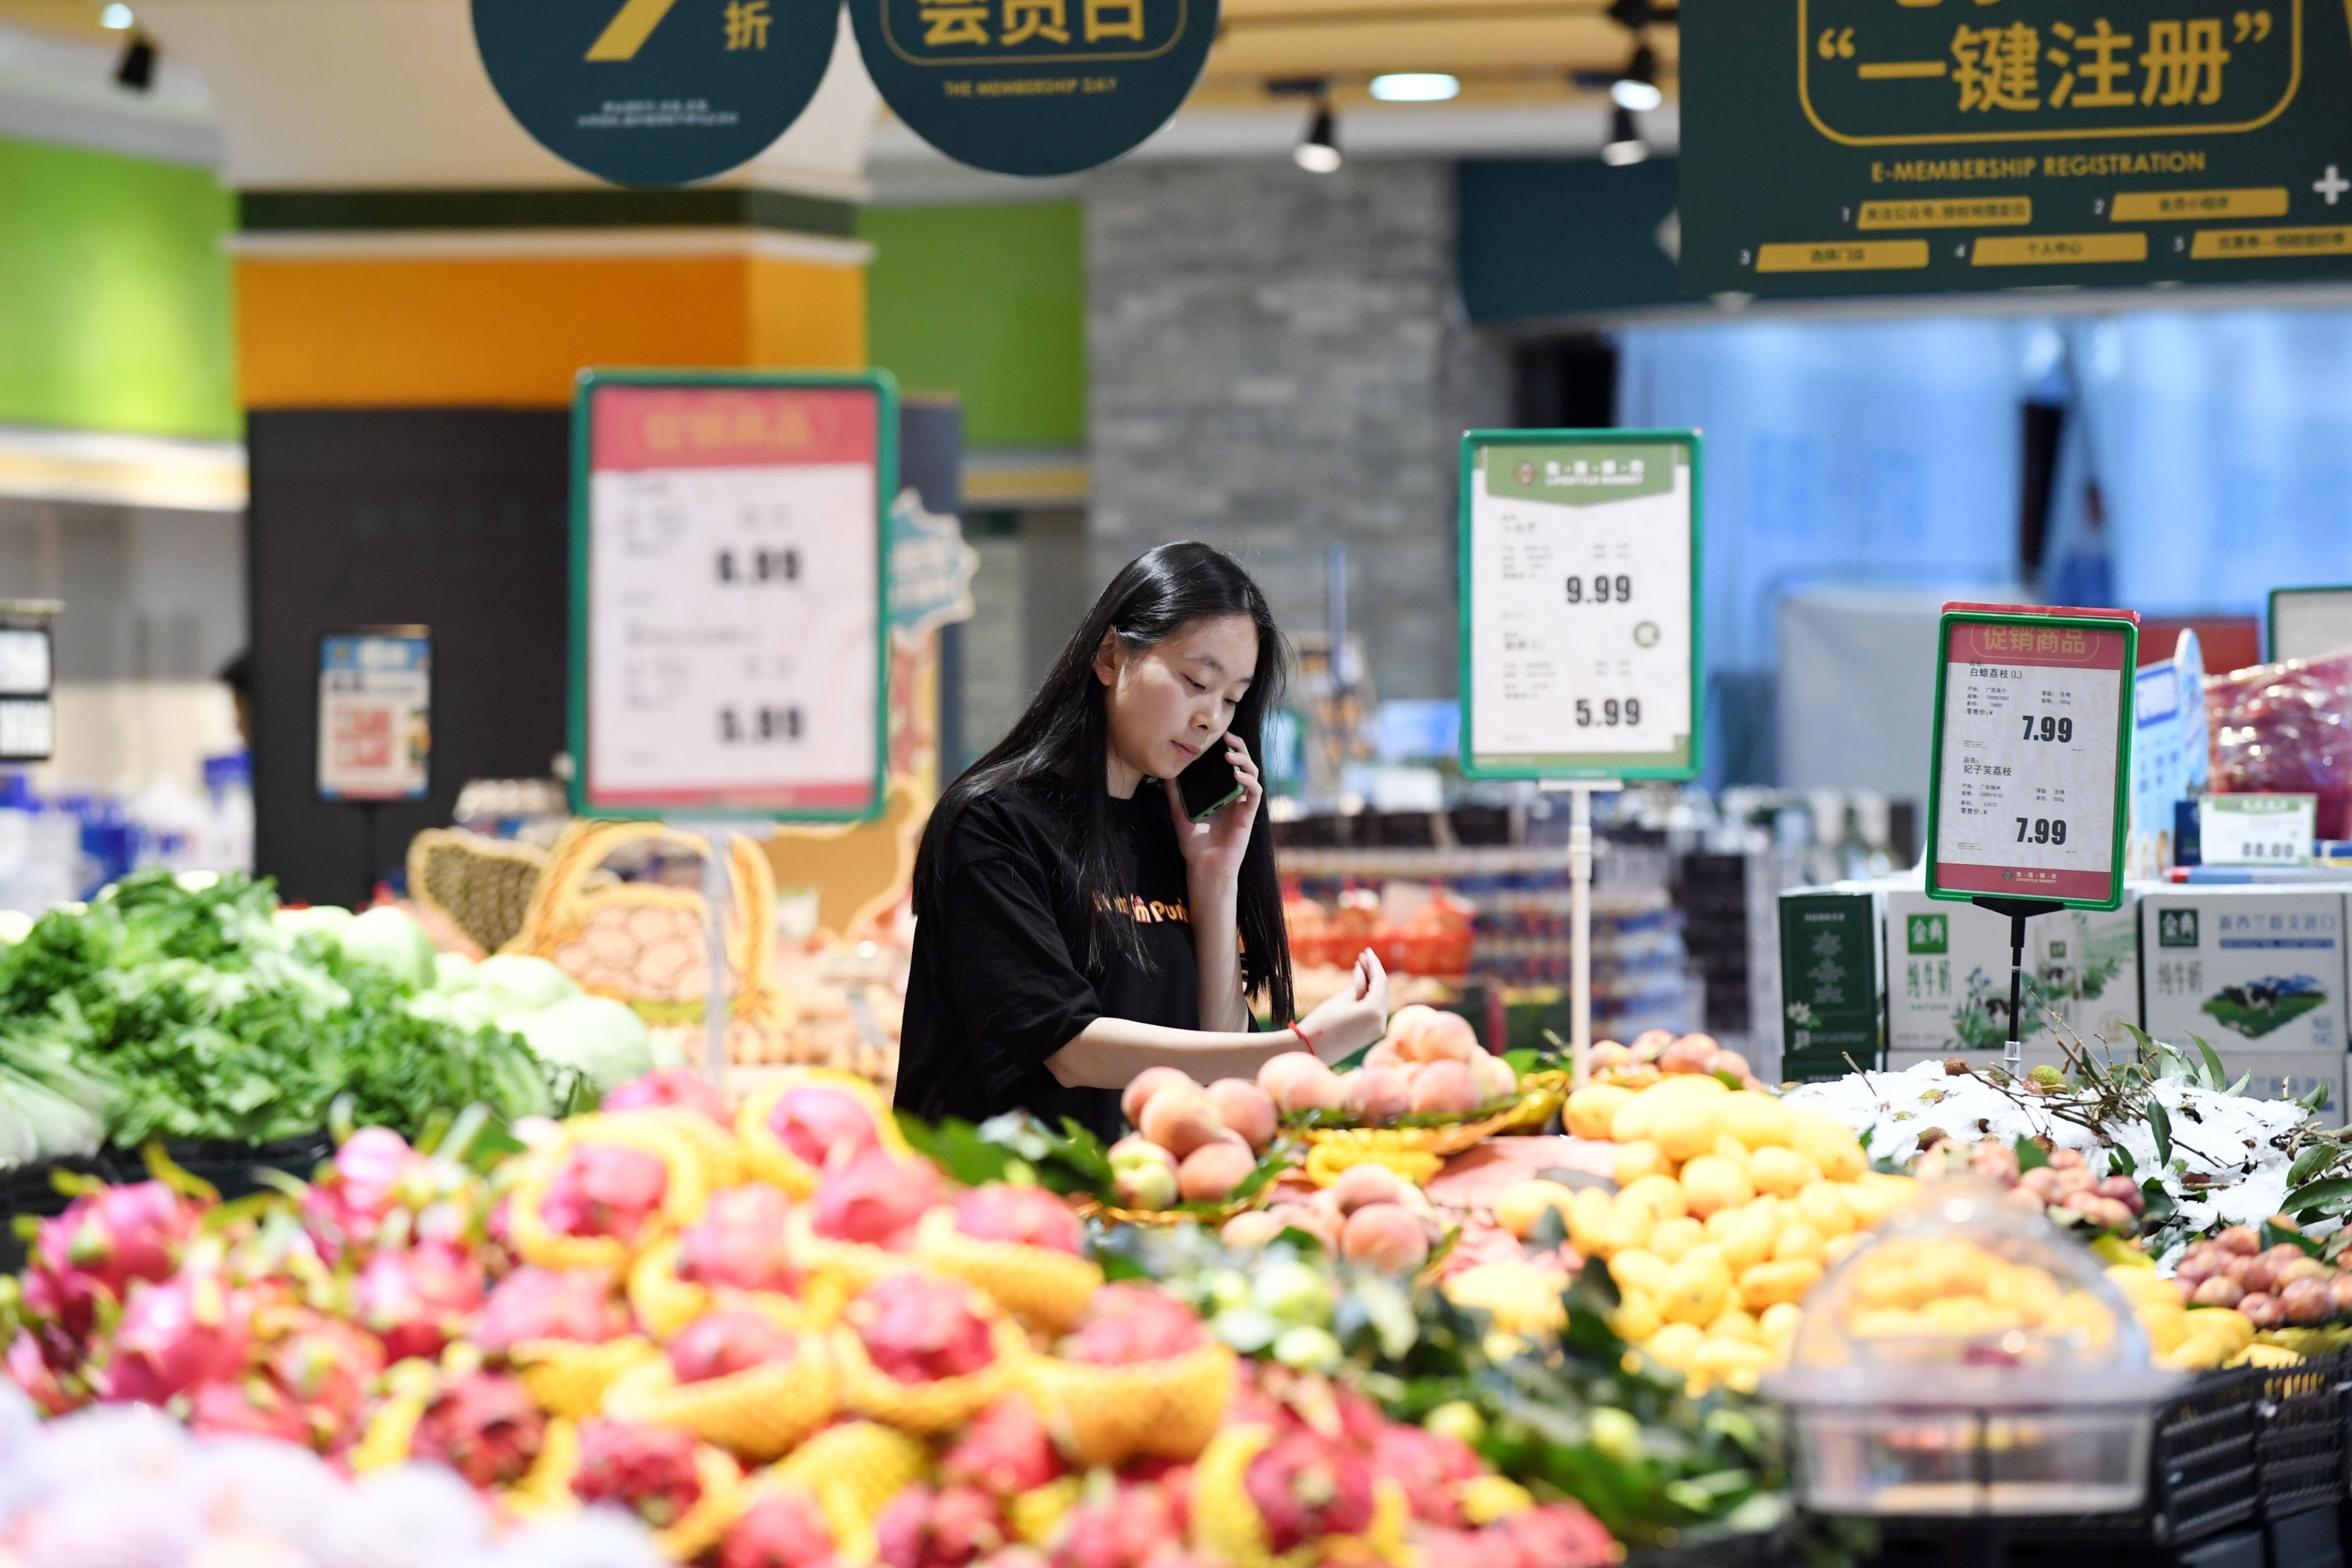 A customer at a supermarket in Renhuai, Guizhou province, on June 9. In taking over grocery shopping and other household chores, “full-time children” are finally having down-to-earth experiences. Photo: Xinhua